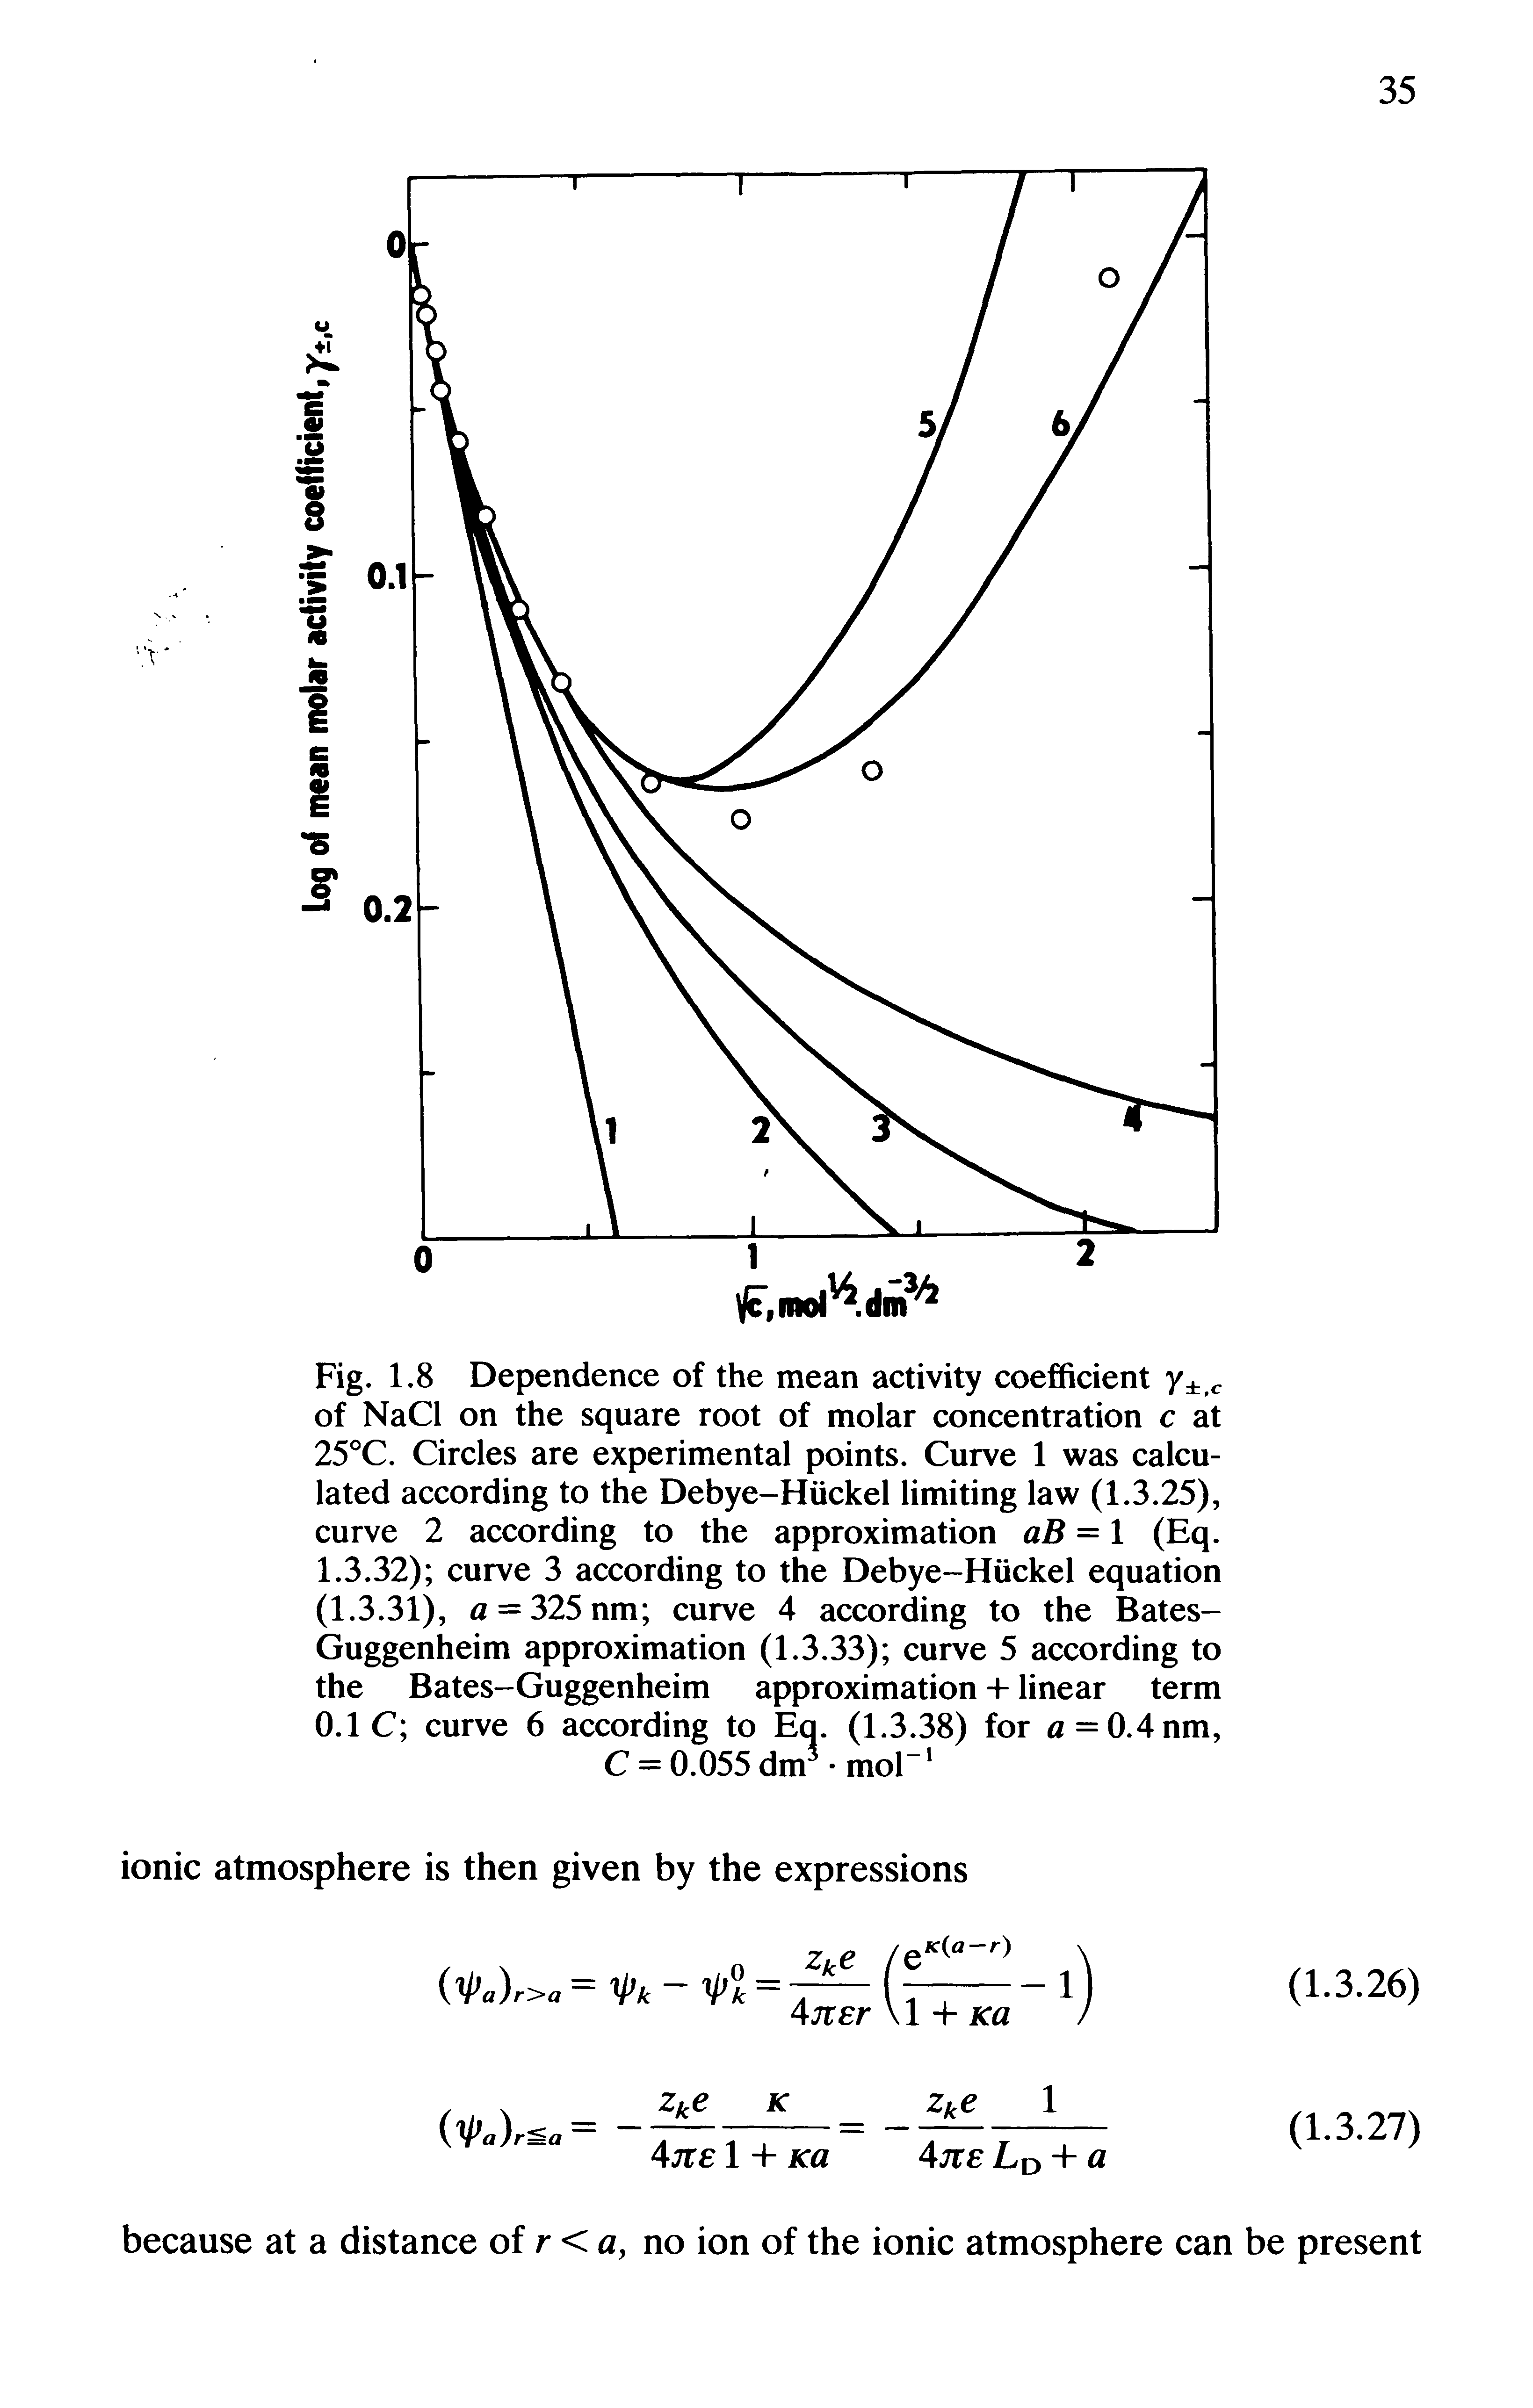 Fig. 1.8 Dependence of the mean activity coefficient y tC of NaCl on the square root of molar concentration c at 25°C. Circles are experimental points. Curve 1 was calculated according to the Debye-Hiickel limiting law (1.3.25), curve 2 according to the approximation aB = 1 (Eq. 1.3.32) curve 3 according to the Debye-Hiickel equation (1.3.31), a = 325nm curve 4 according to the Bates-Guggenheim approximation (1.3.33) curve 5 according to the Bates-Guggenheim approximation + linear term 0.1 C curve 6 according to Eq. (1.3.38) for a = 0.4nm, C = 0.055dm5-mor ...